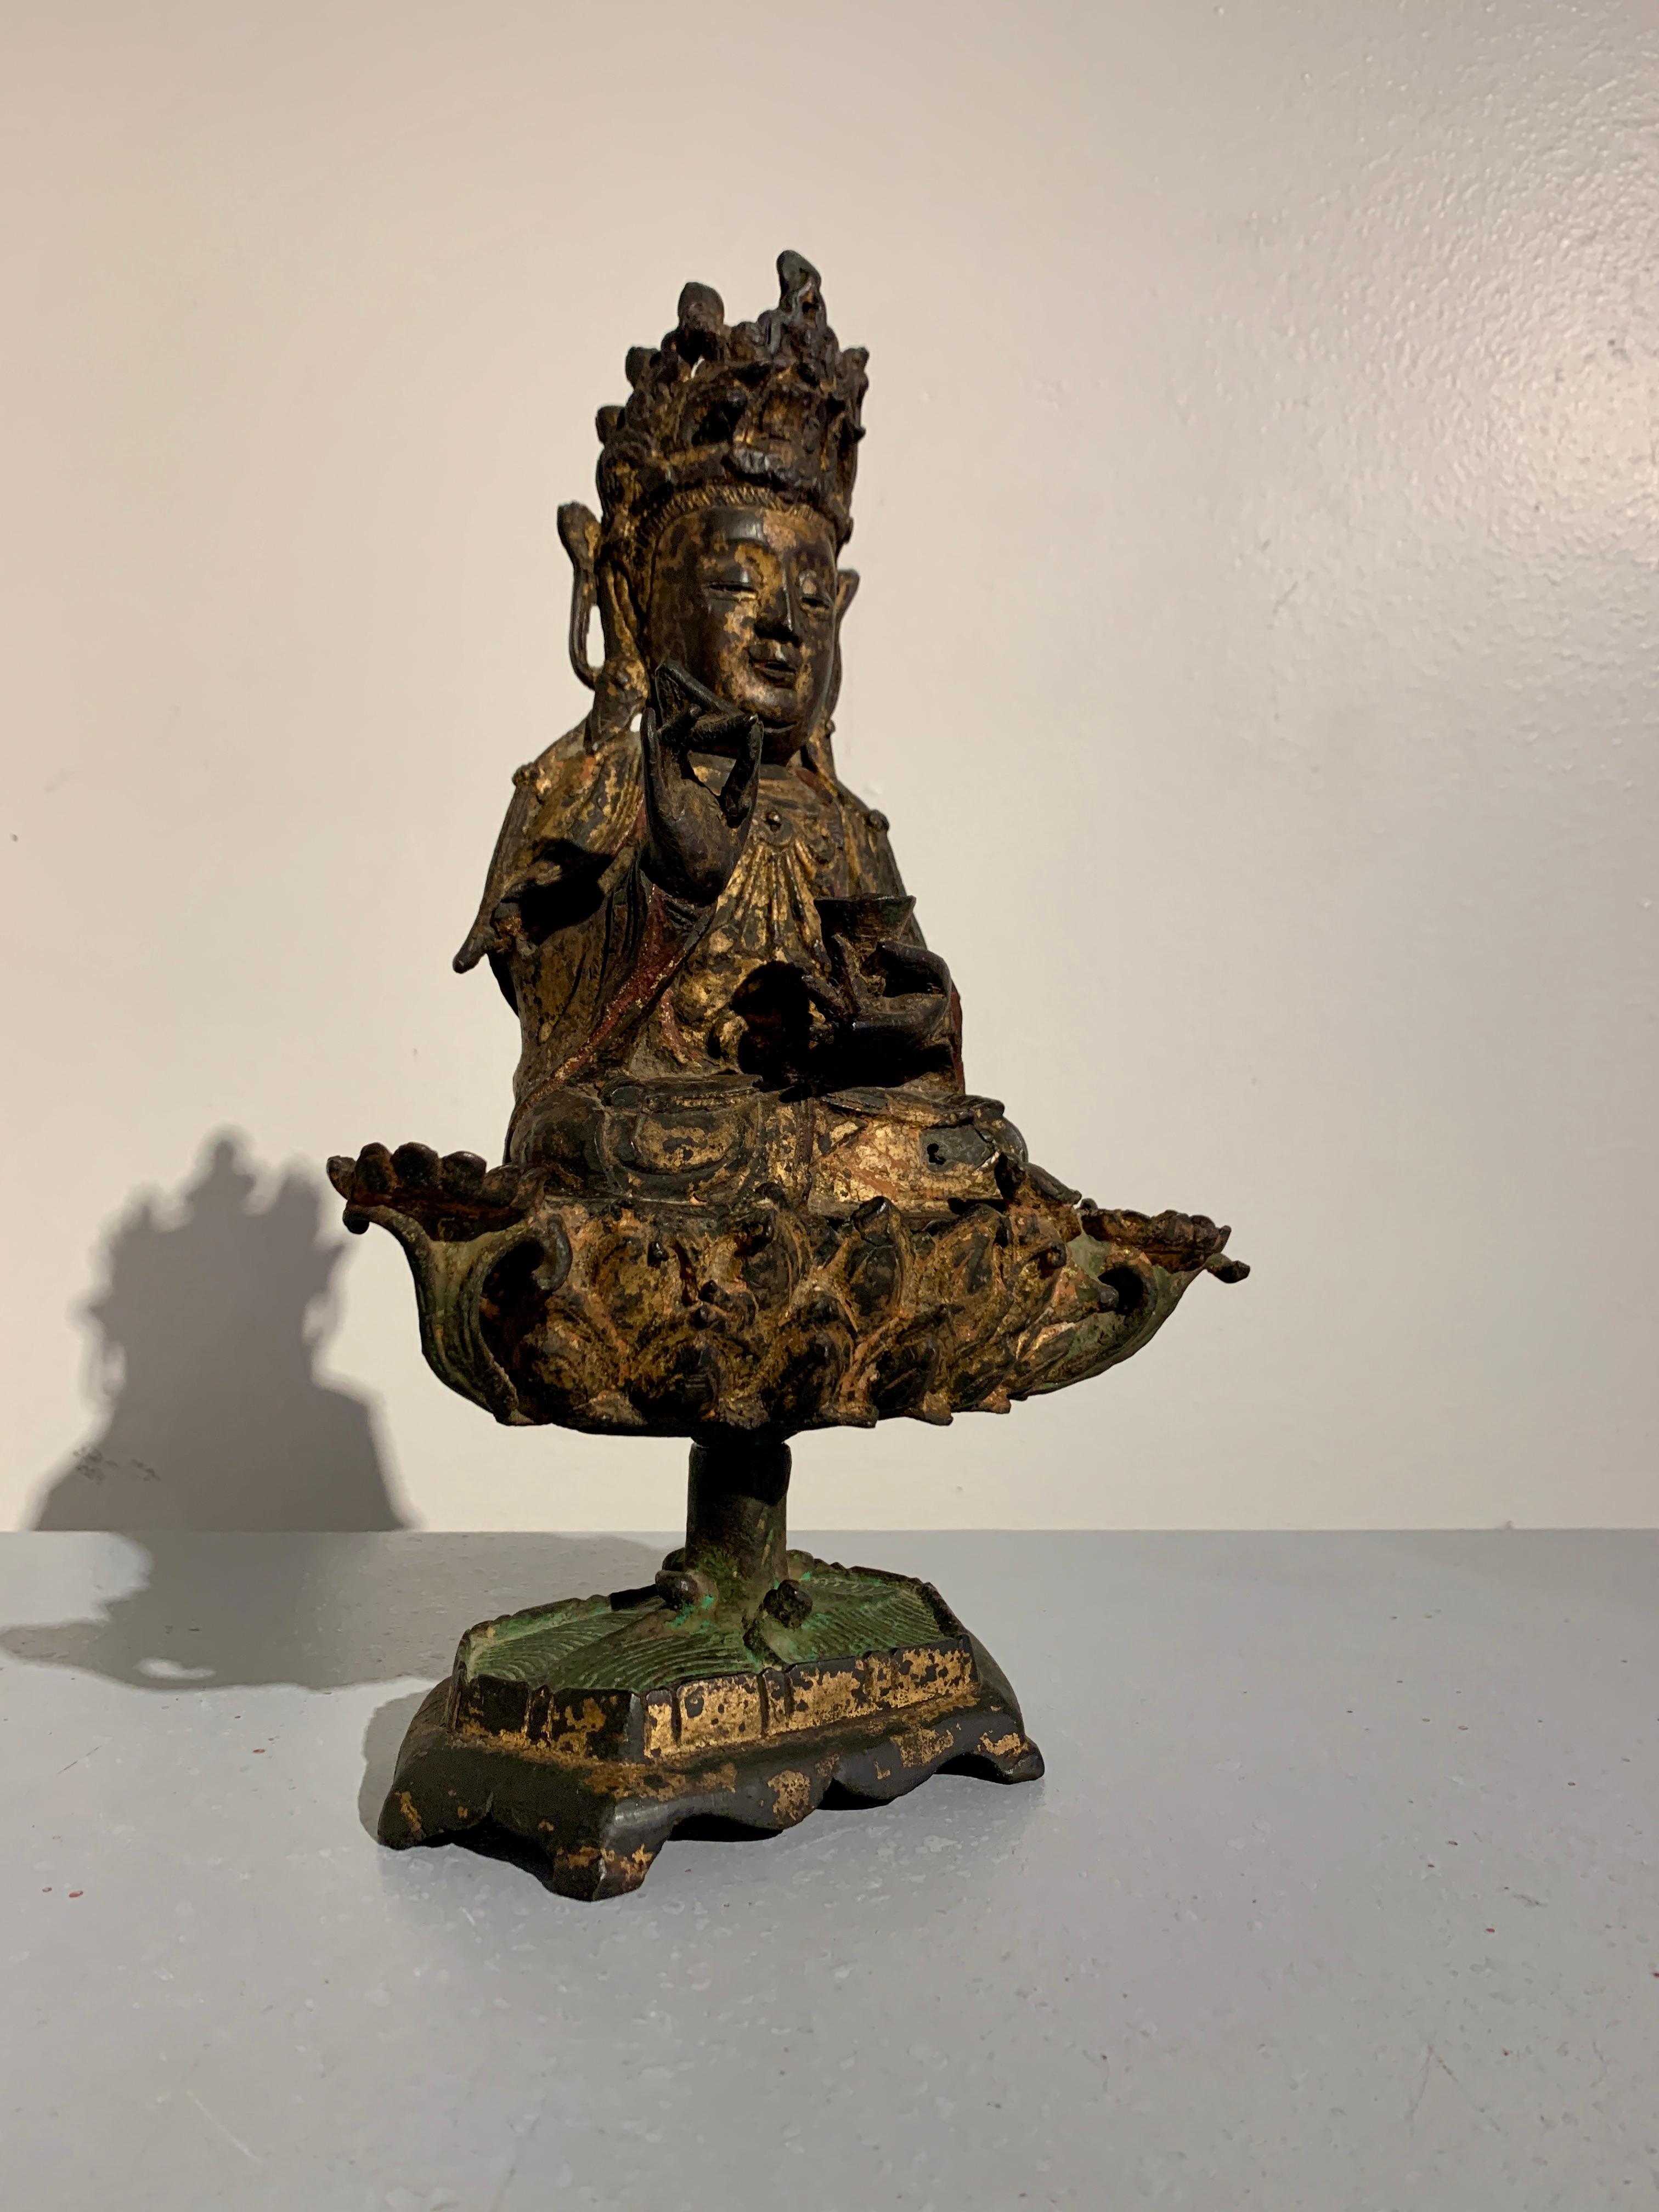 A decidingly charming Chinese polychromed and gilt cast bronze figure of Nanhai Guanyin, Guanyin of the South Sea, Ming Dynasty, 16th/17th century, China.

Guanyin, the bodhisattva of compassion, is portrayed here as a beatific figure seated upon